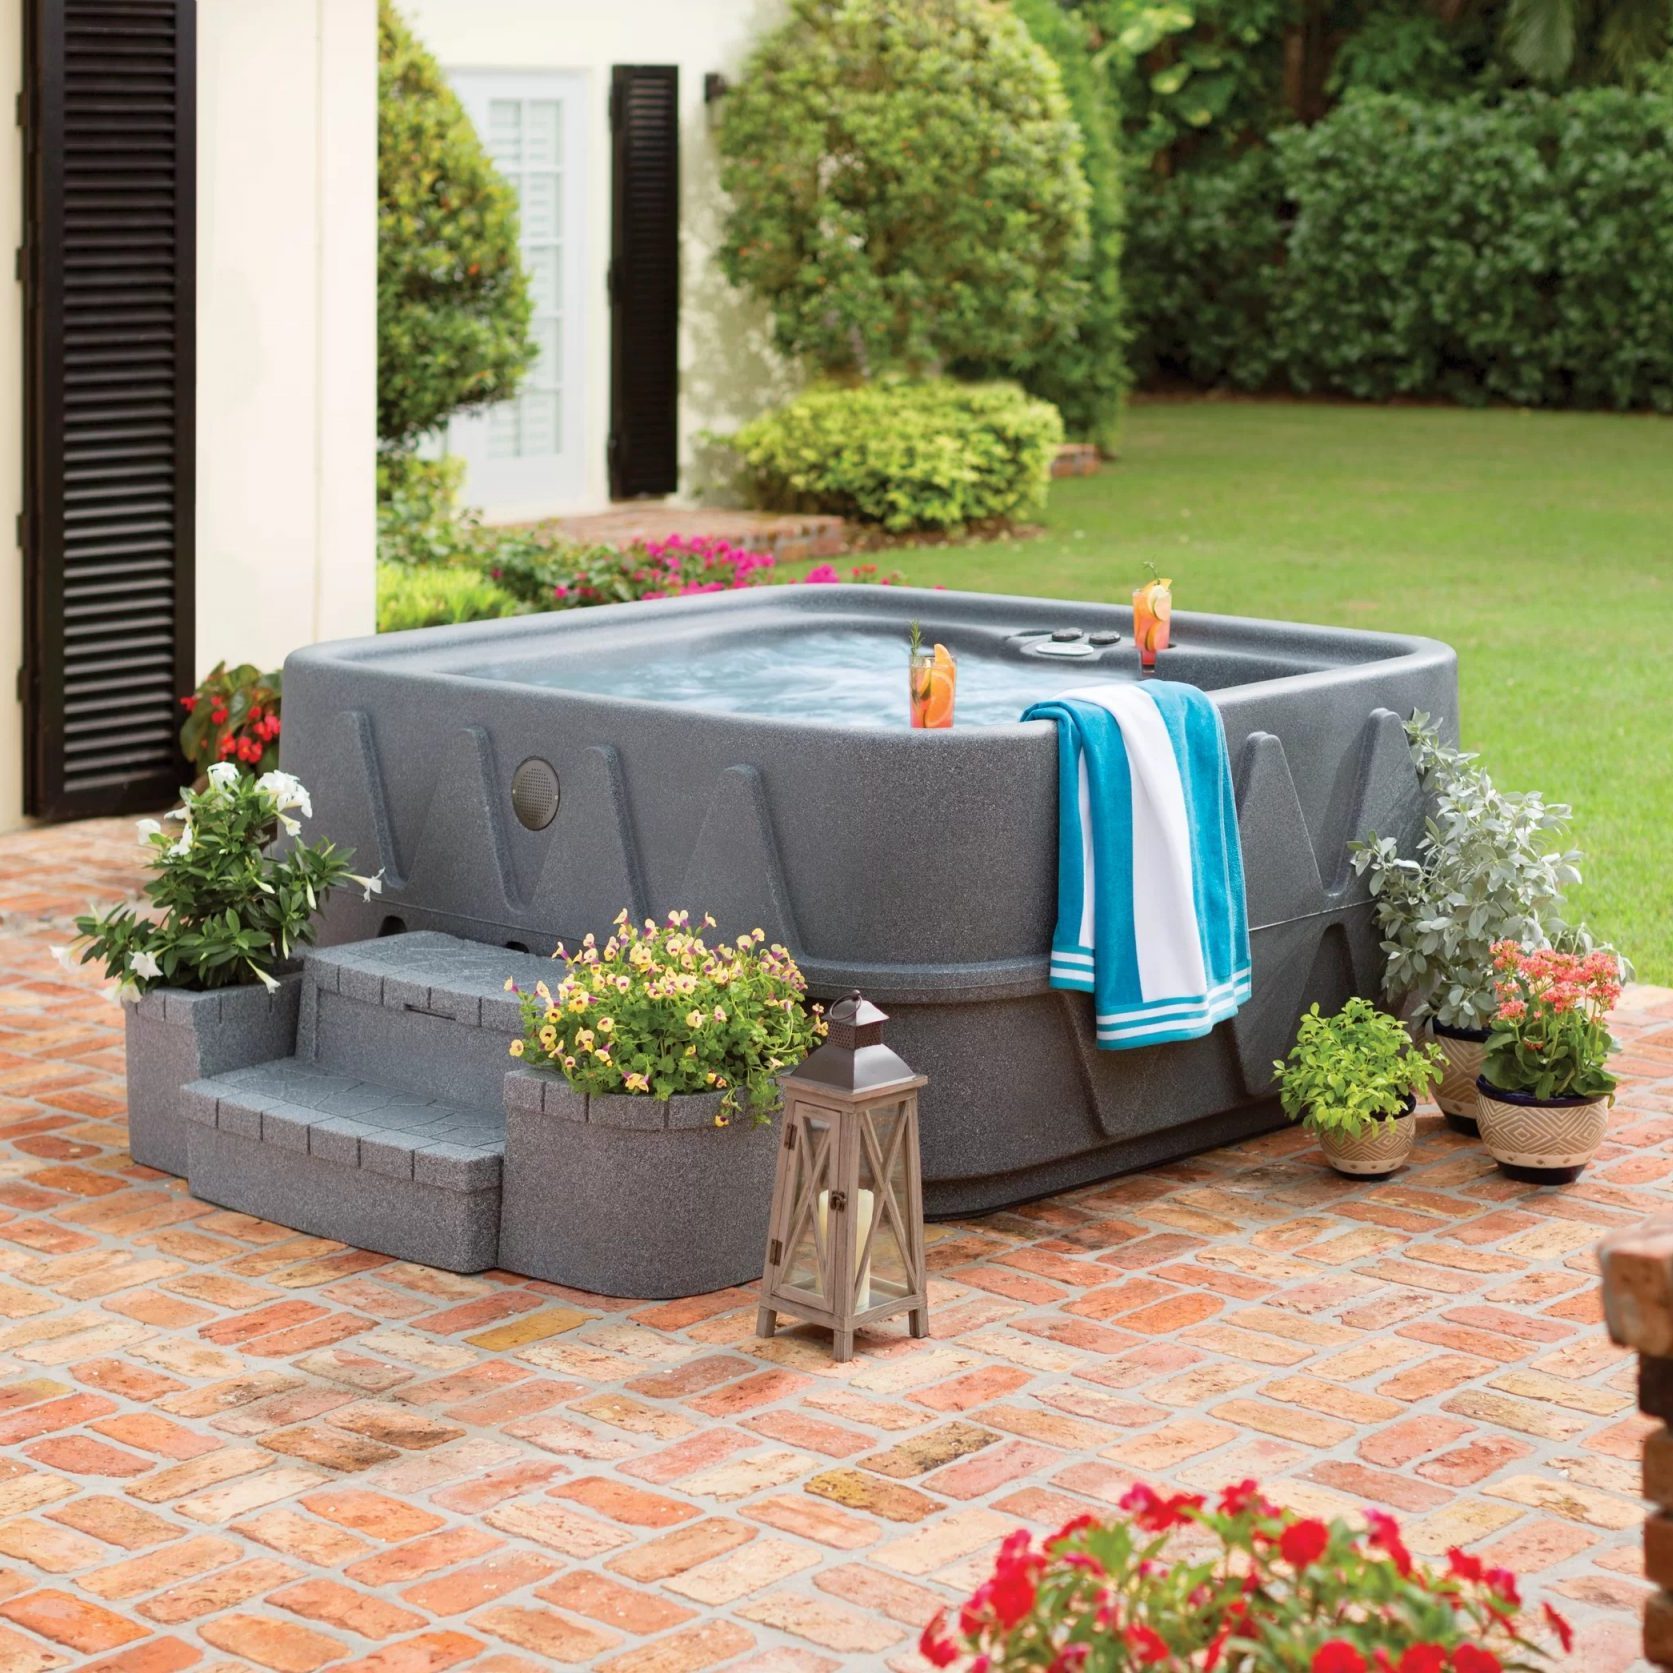 The 9 Best Hot Tubs for a Spa-Like Feel in Your Very Own Backyard